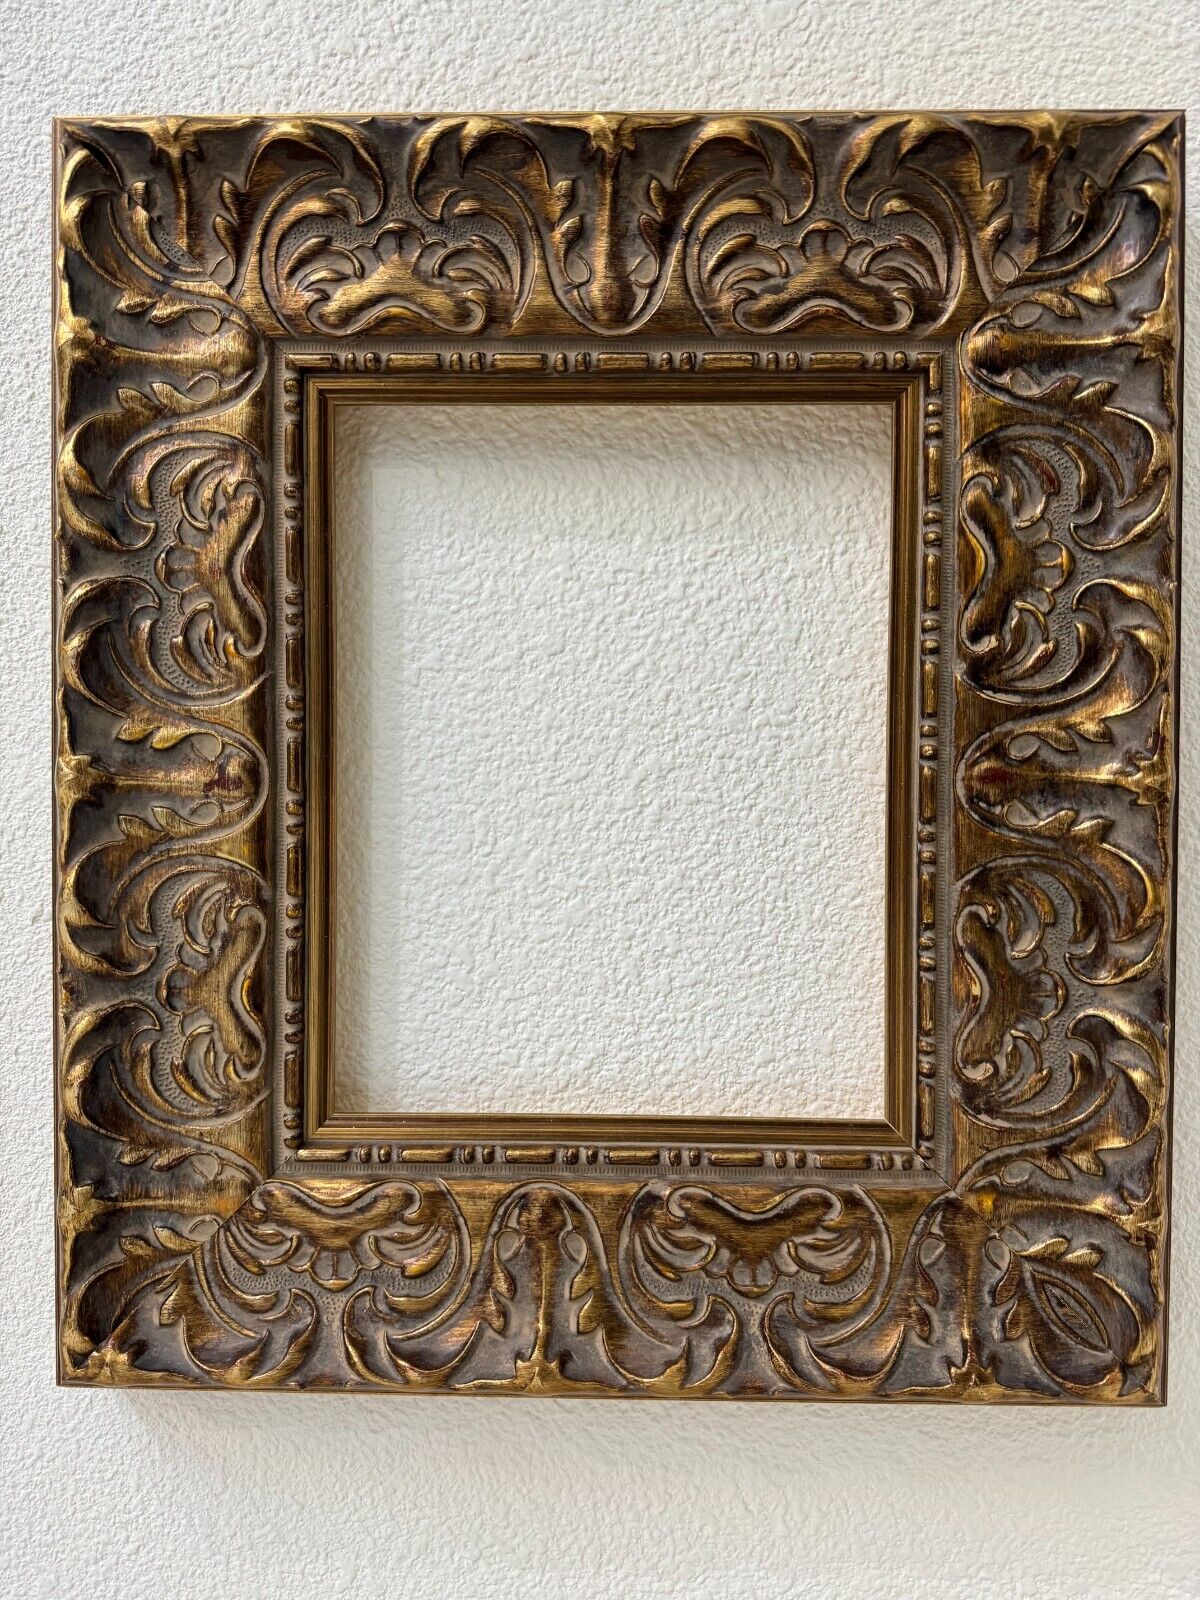 Real wood vintage picture frame 8x10 antique gold ornate for photo art painting